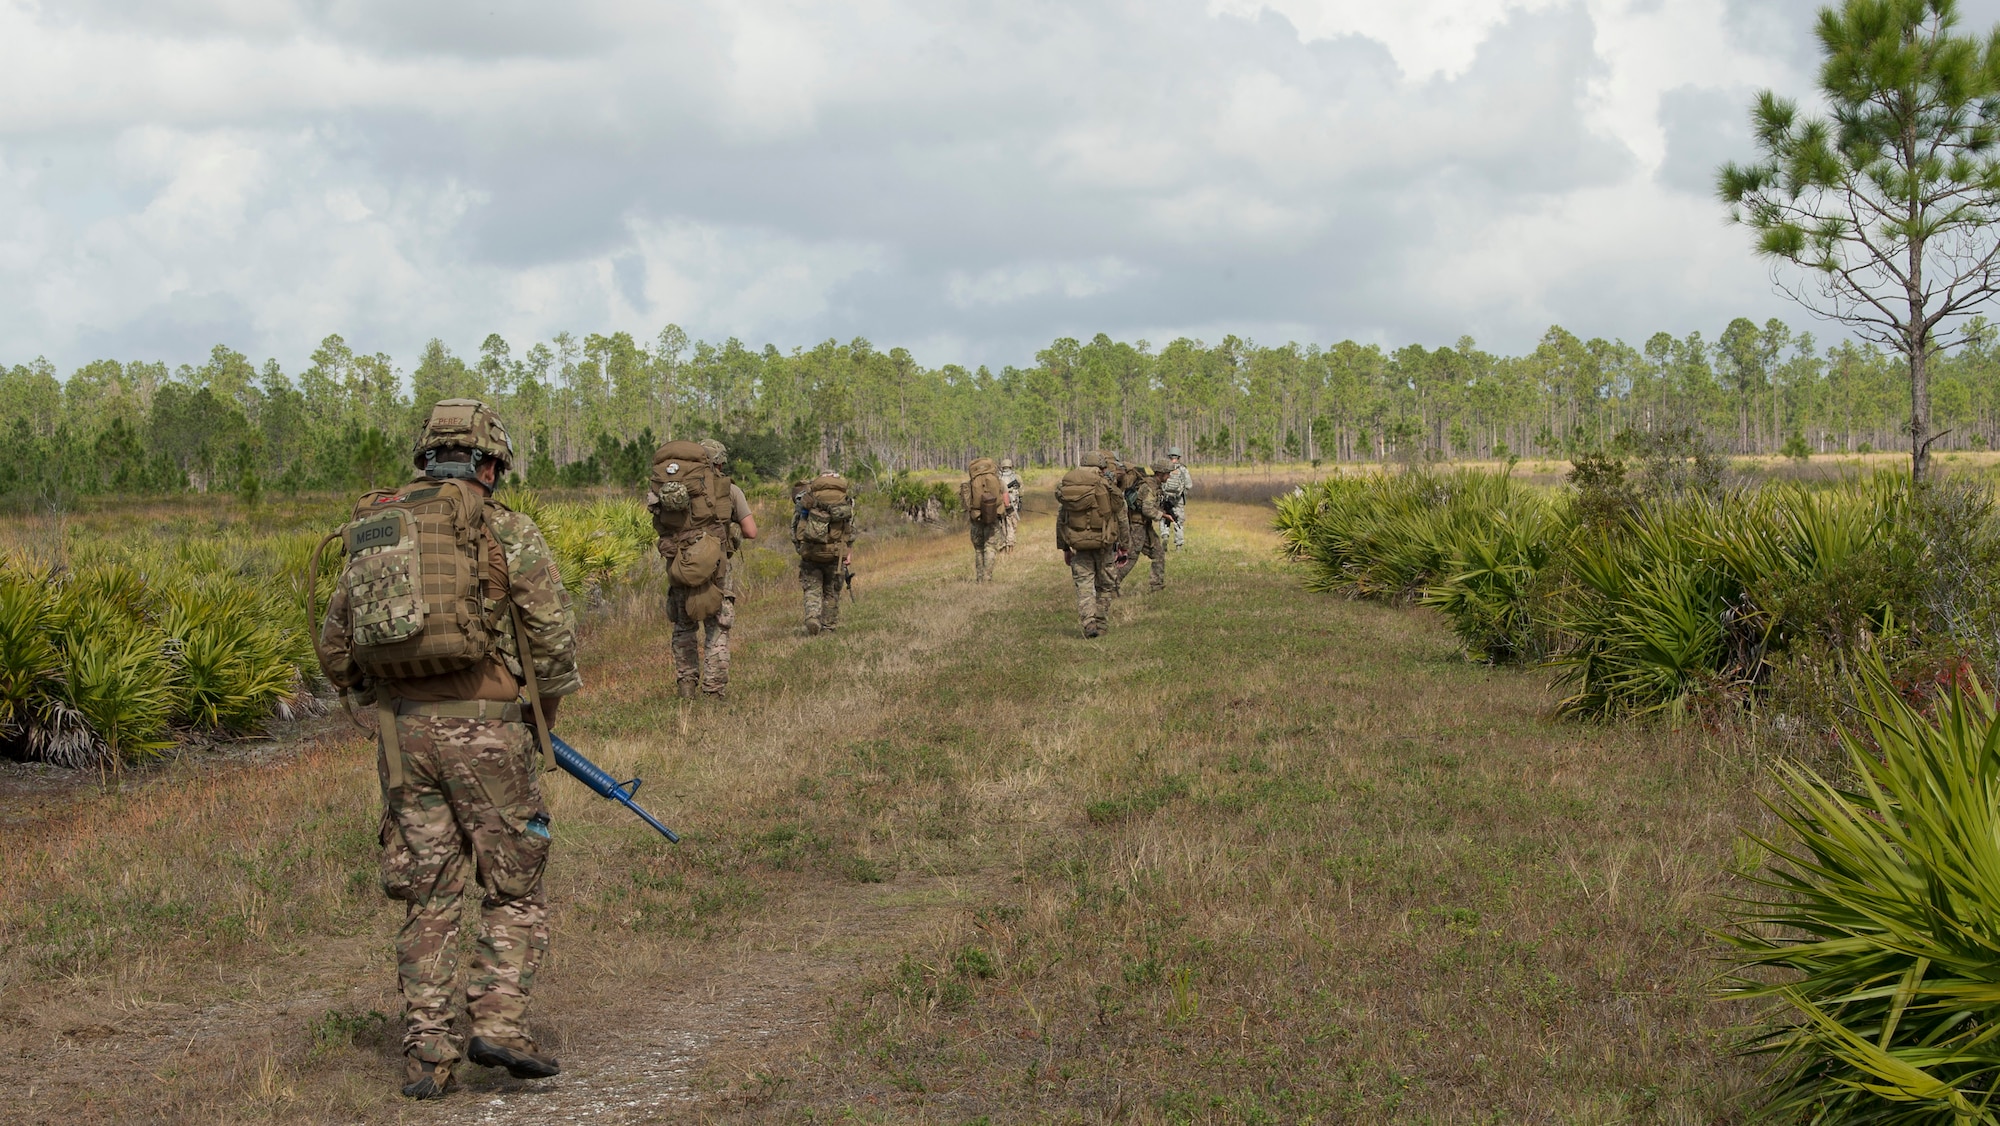 U.S. Air Force Airmen from the 6th Civil Engineer Squadron explosive ordnance disposal flight, the 6th Security Forces Squadron and the 927th Aeromedical Staging Squadron ruck march through Avon Park Air Force Range, Fla., Dec. 11, 2019.  The Airmen carried rucksacks weighing 35 to 50 pounds during a field training exercise to simulate real-world deployment operations.